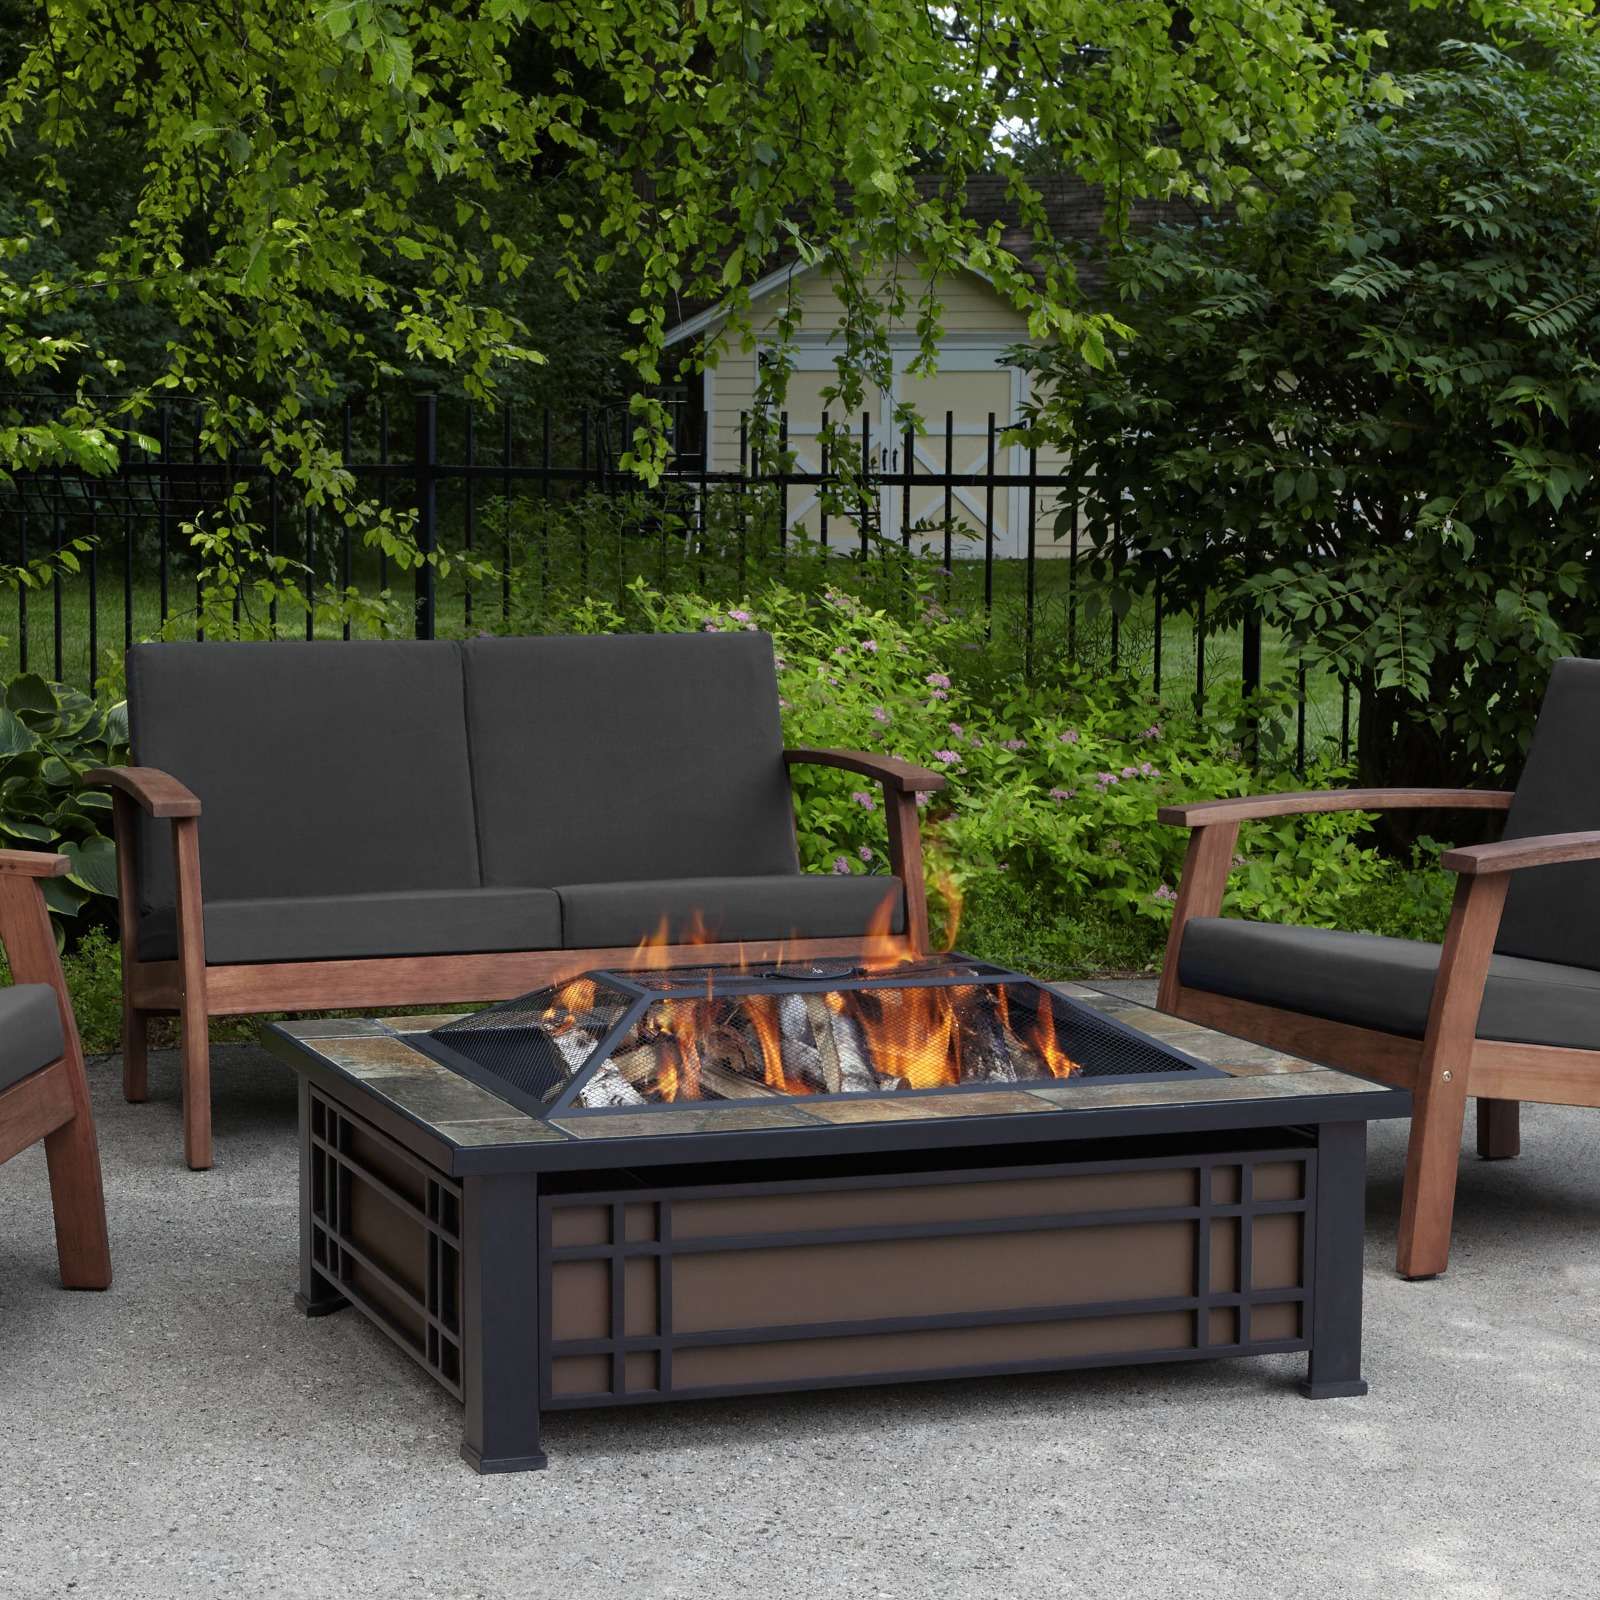 Hamilton Wood Burning Fire Pit by Real flame